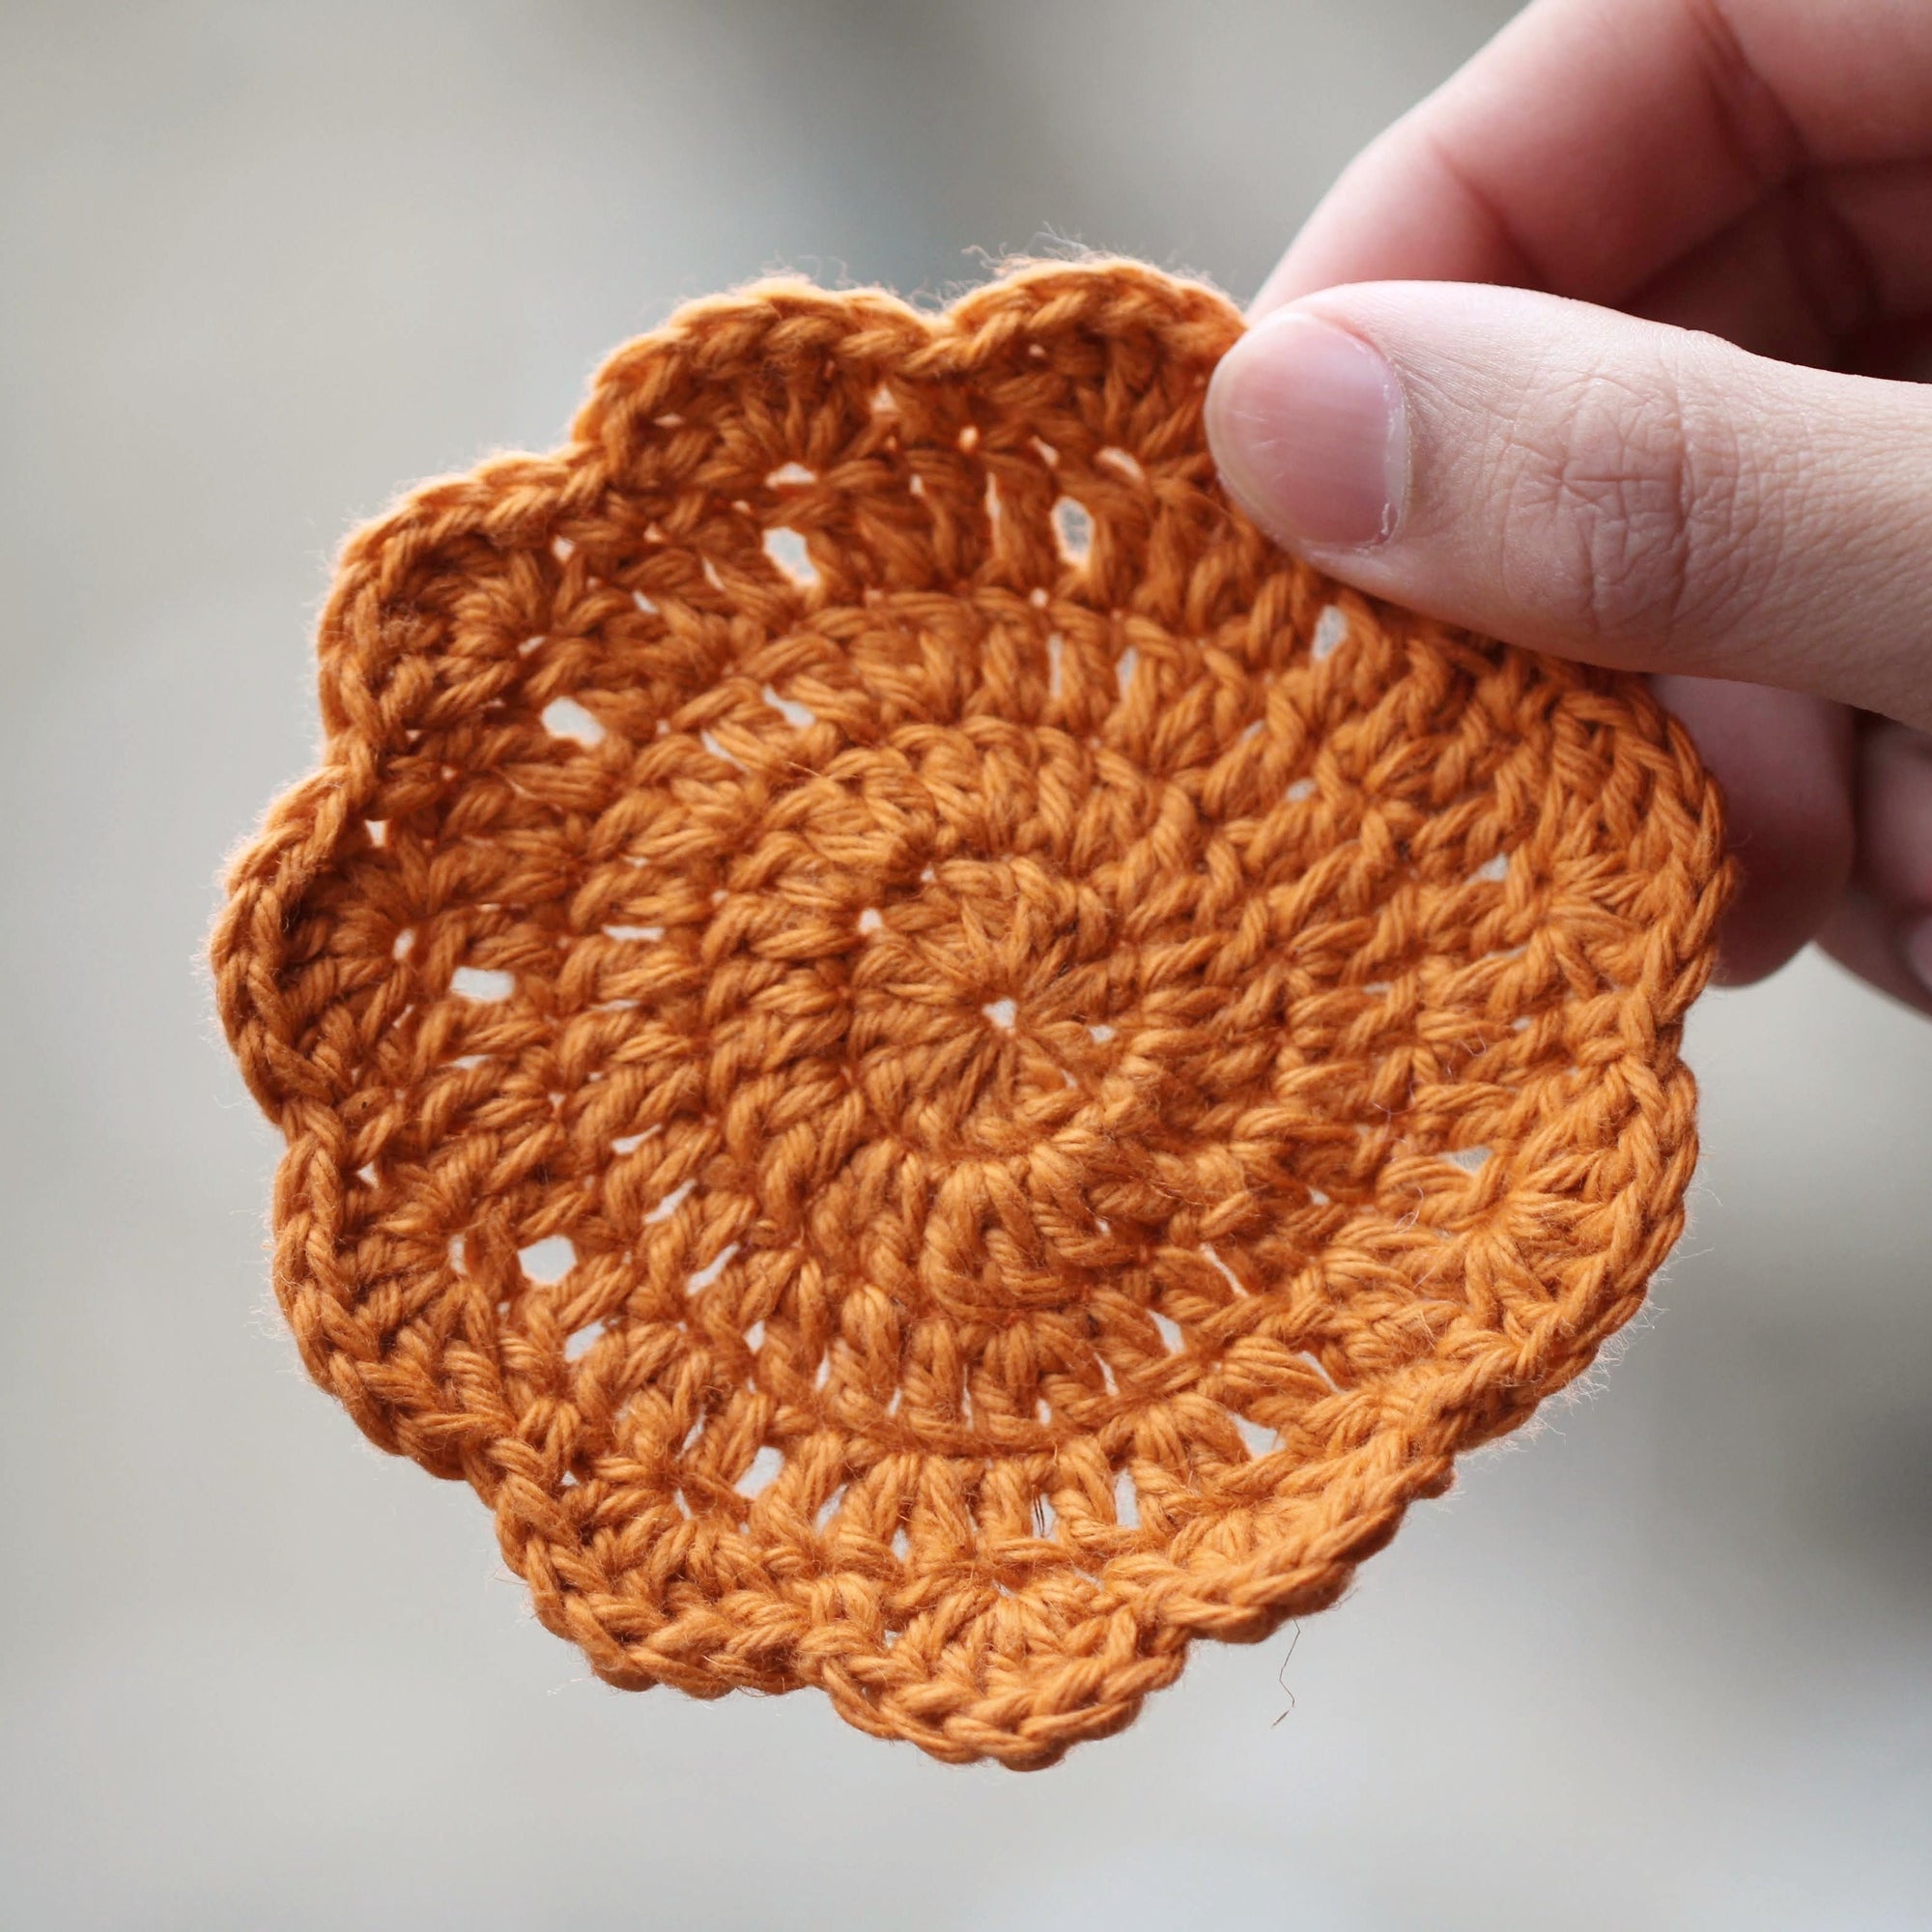 A round crocheted coaster with a scalloped edge. It is light orange and being held up my a human hand against a blurry background.